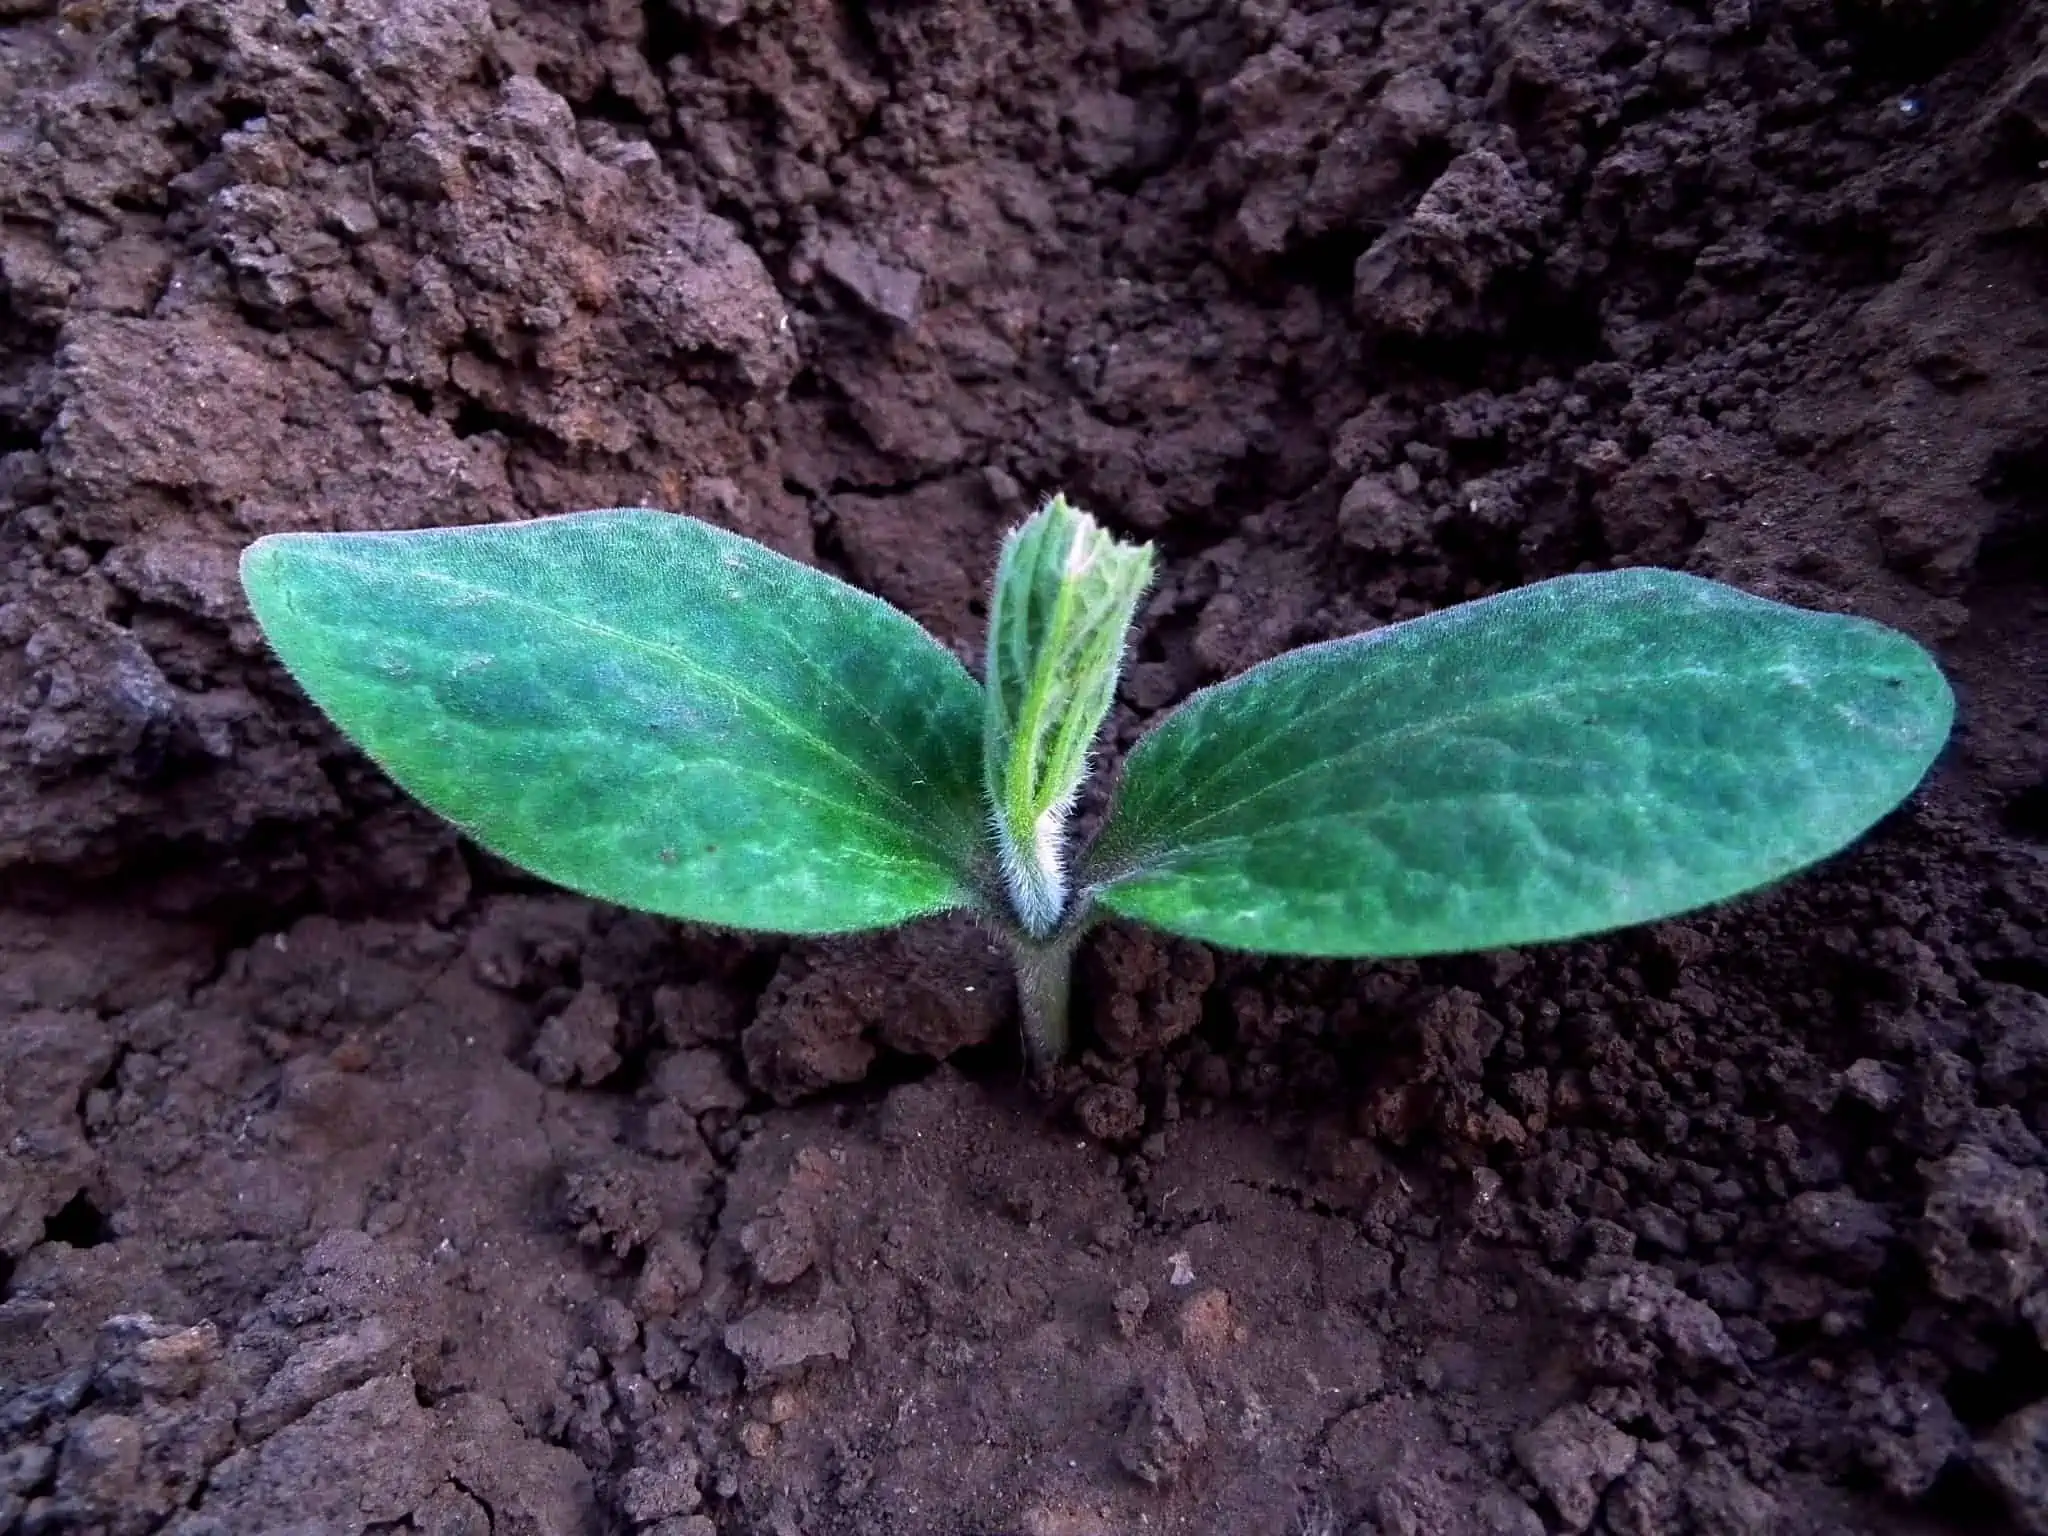 Pumpkin seedling sprouting out of the dirt.